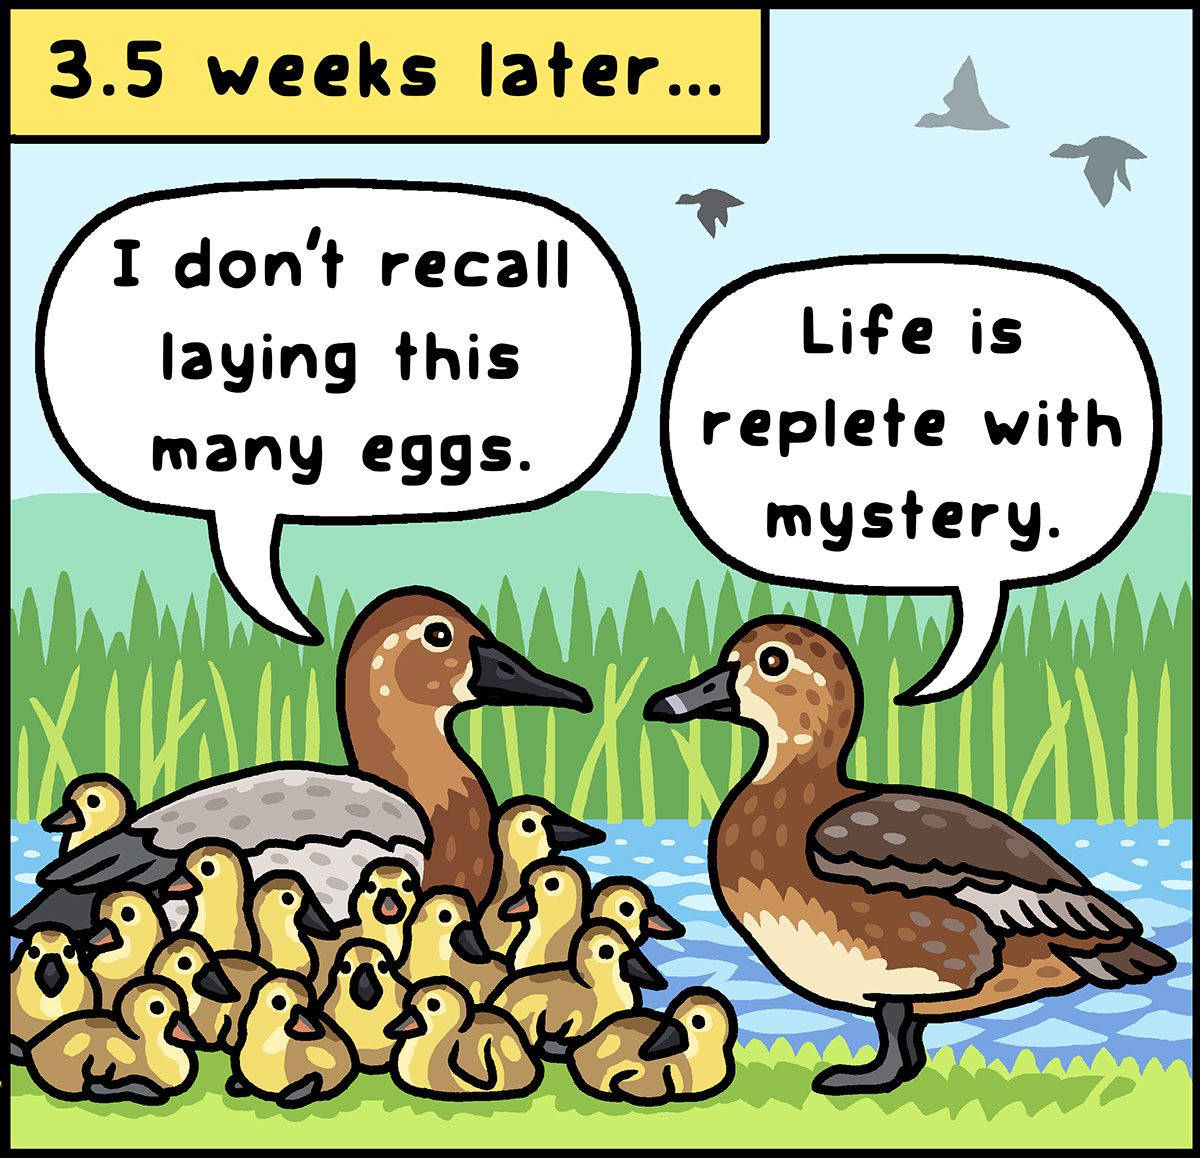 Cartoon of two different species of ducks, 3.5 weeks later, one with lots of chicks, saying "I don't recall laying this many eggs," the other with none saying "life is replete with mystery."